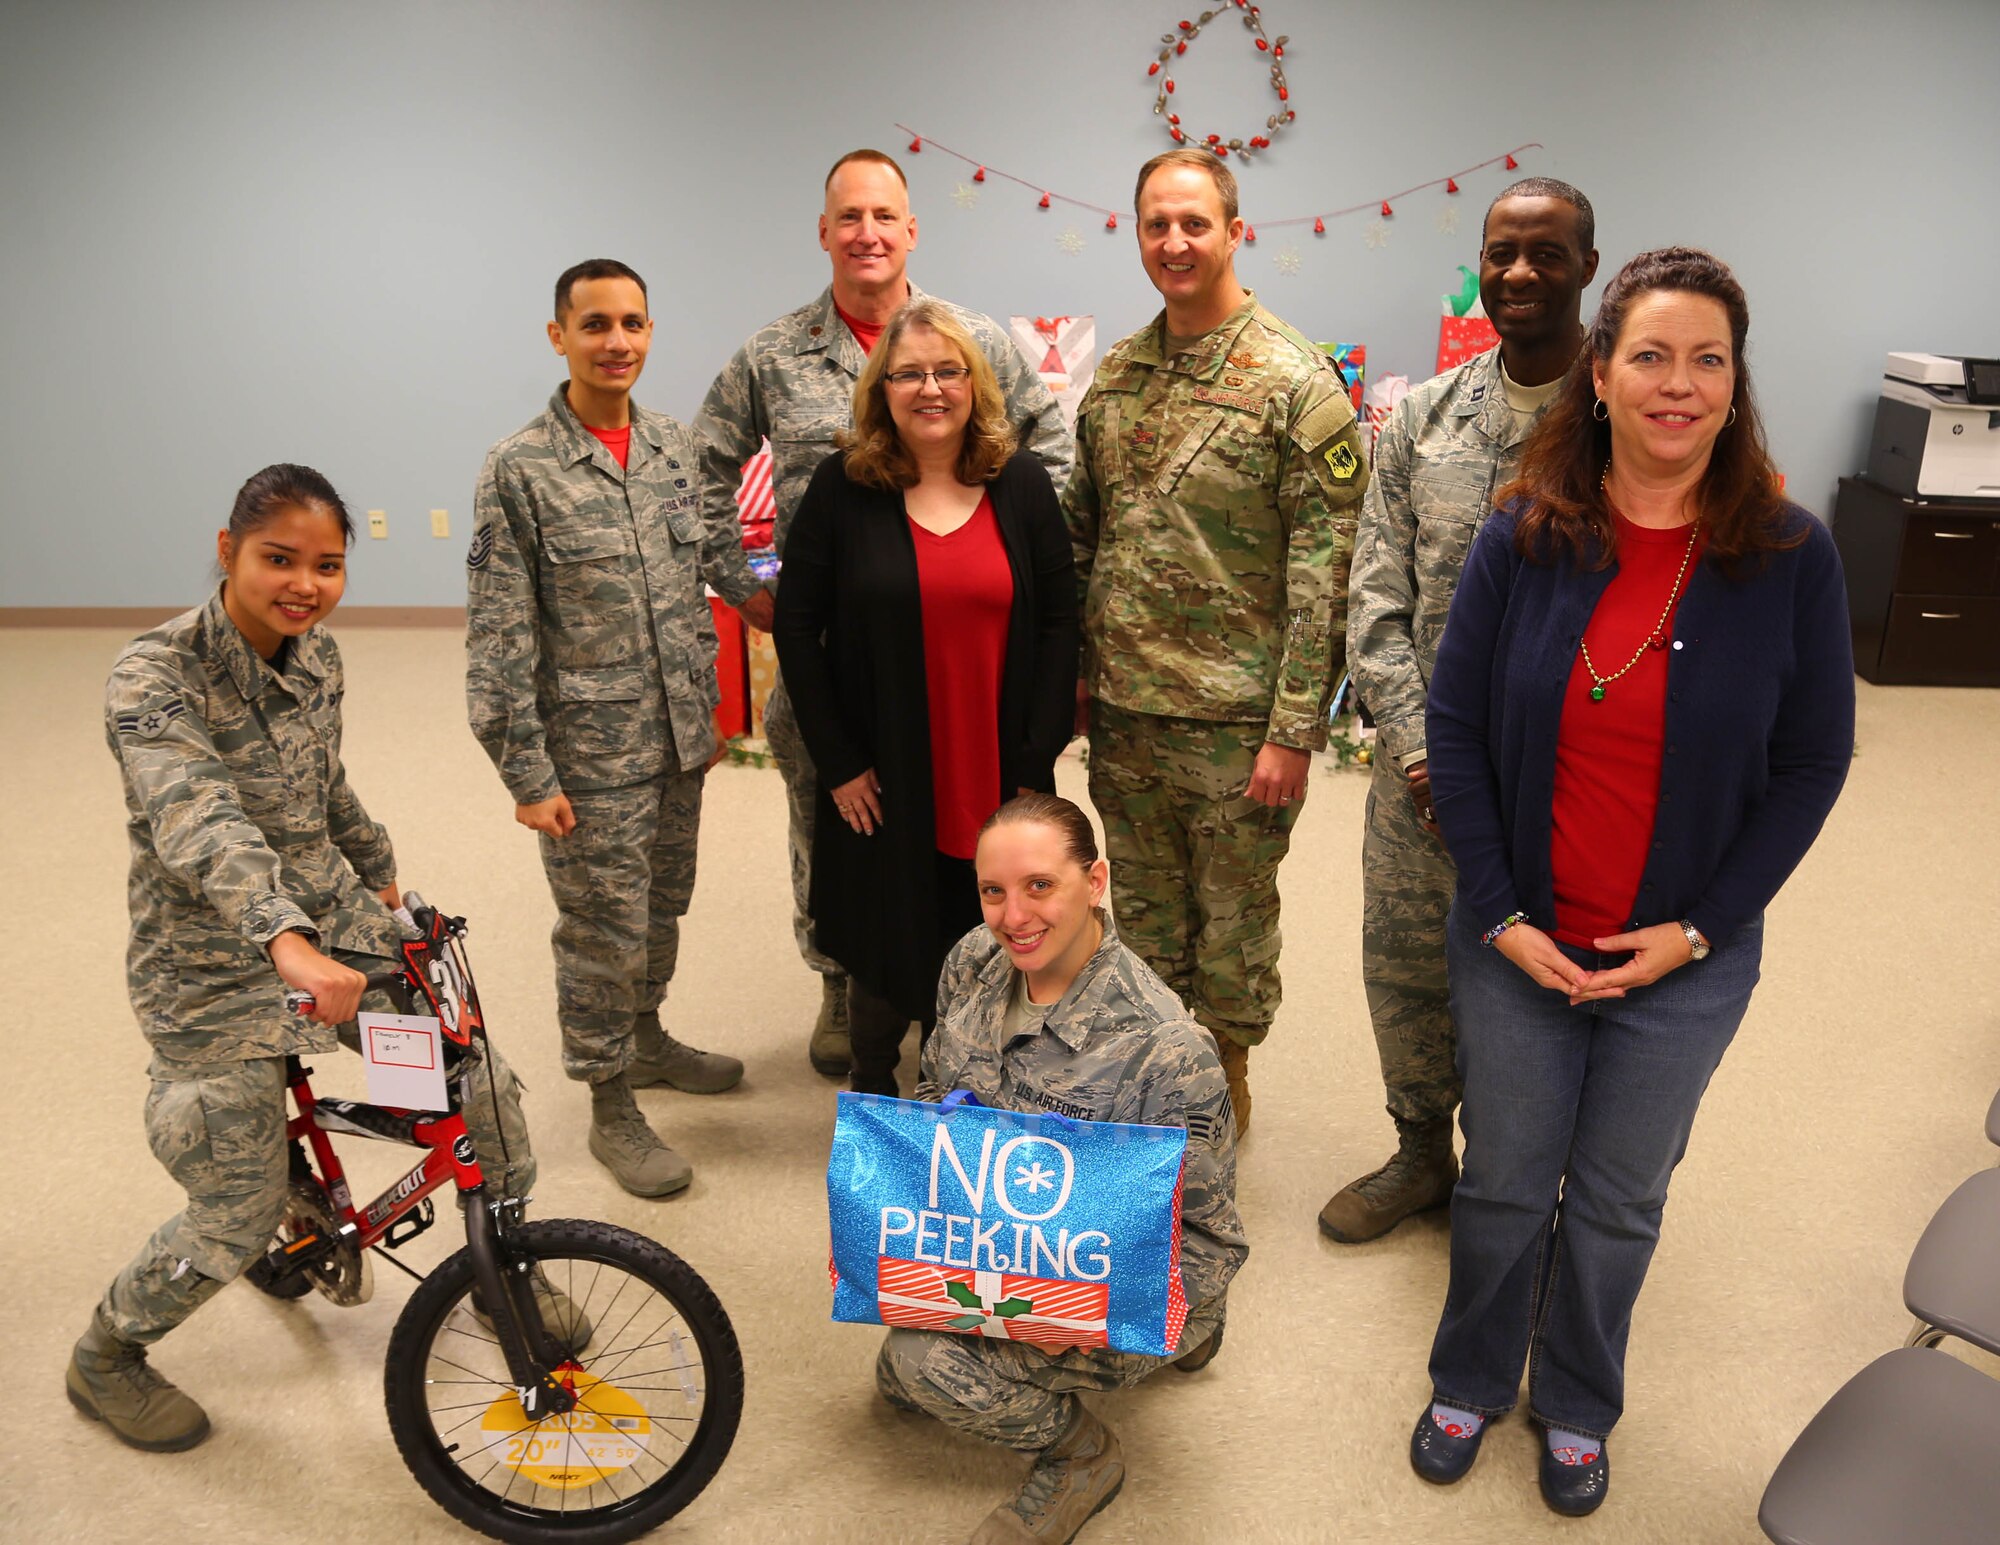 Col. Julian Cheater, 432nd Wing/432nd Air Expeditionary Wing  commander, Kimberly Guerino, Indian Springs School registrar, and Kelly Miles, Indian Springs School counselor, gather for a photo with members of the Human Performance Team and Airmen volunteers who collected, wrapped and coordinated delivery of gifts for Indian Springs Schools students at Creech Air Force Base, Nevada, Dec. 14, 2018. During the past seven years, Creech Airmen have donated roughly 800 presents to children in the local area during the Holidays. (U.S. Air Force photo by Tech. Sgt. Dillon White)